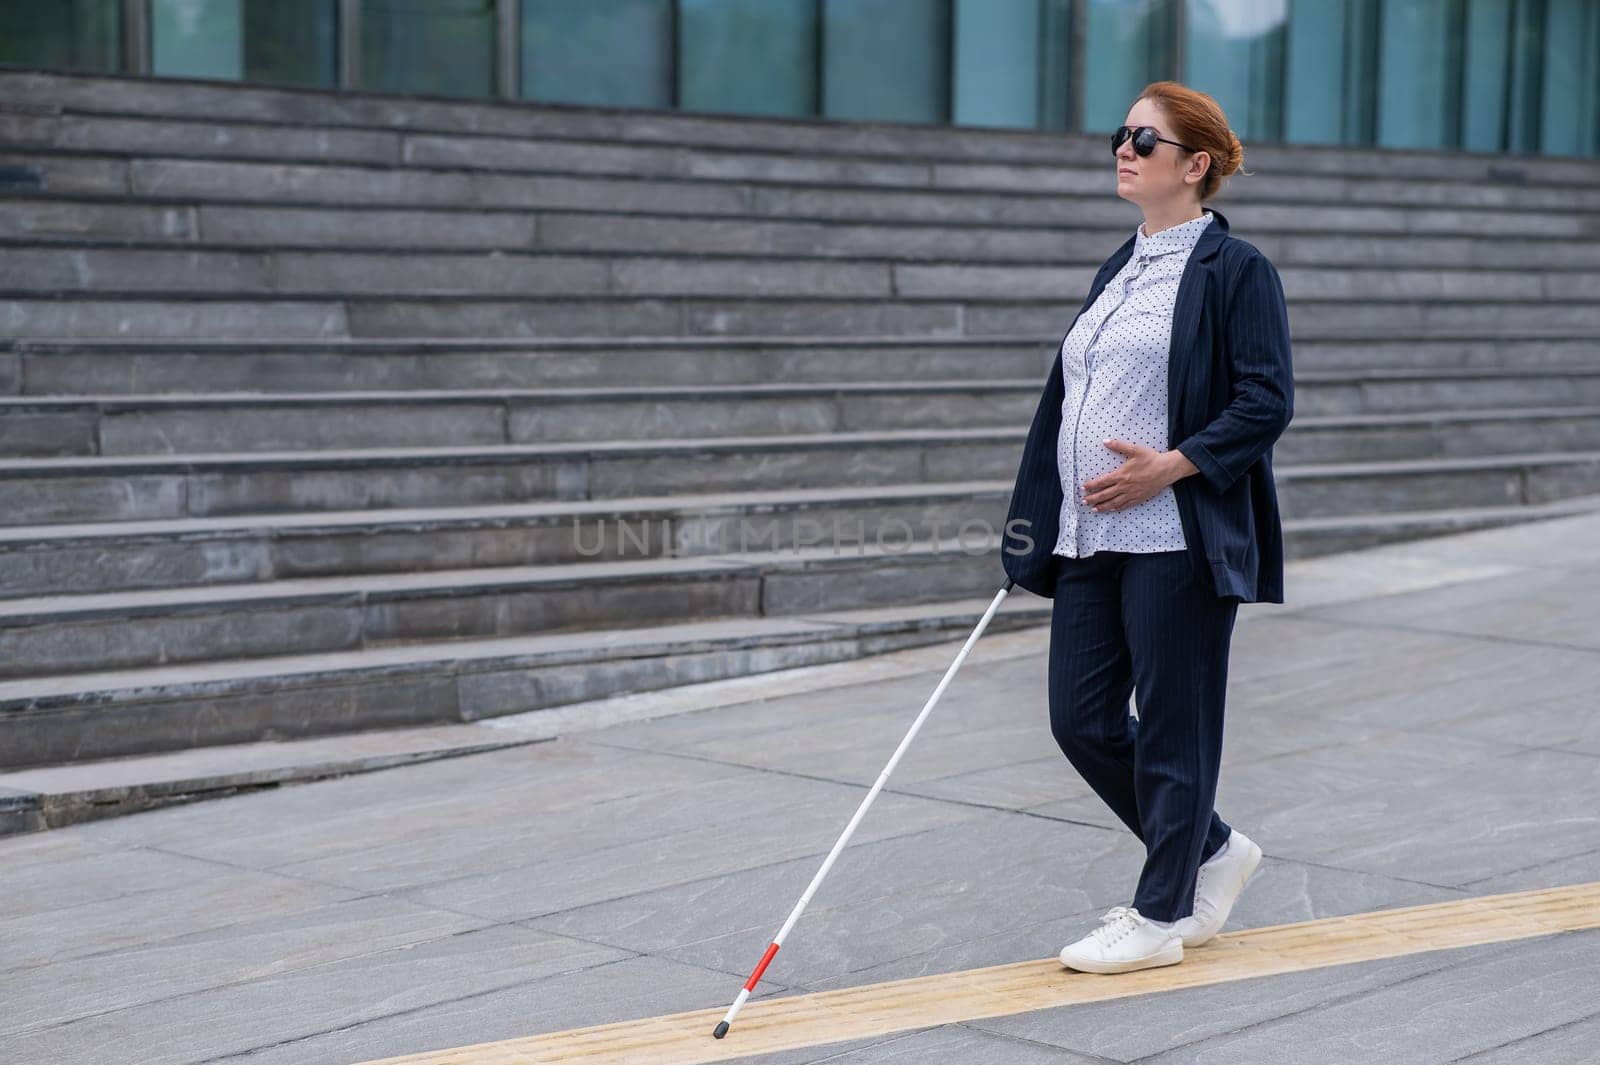 Blind pregnant businesswoman walking along tactile tiles with a cane